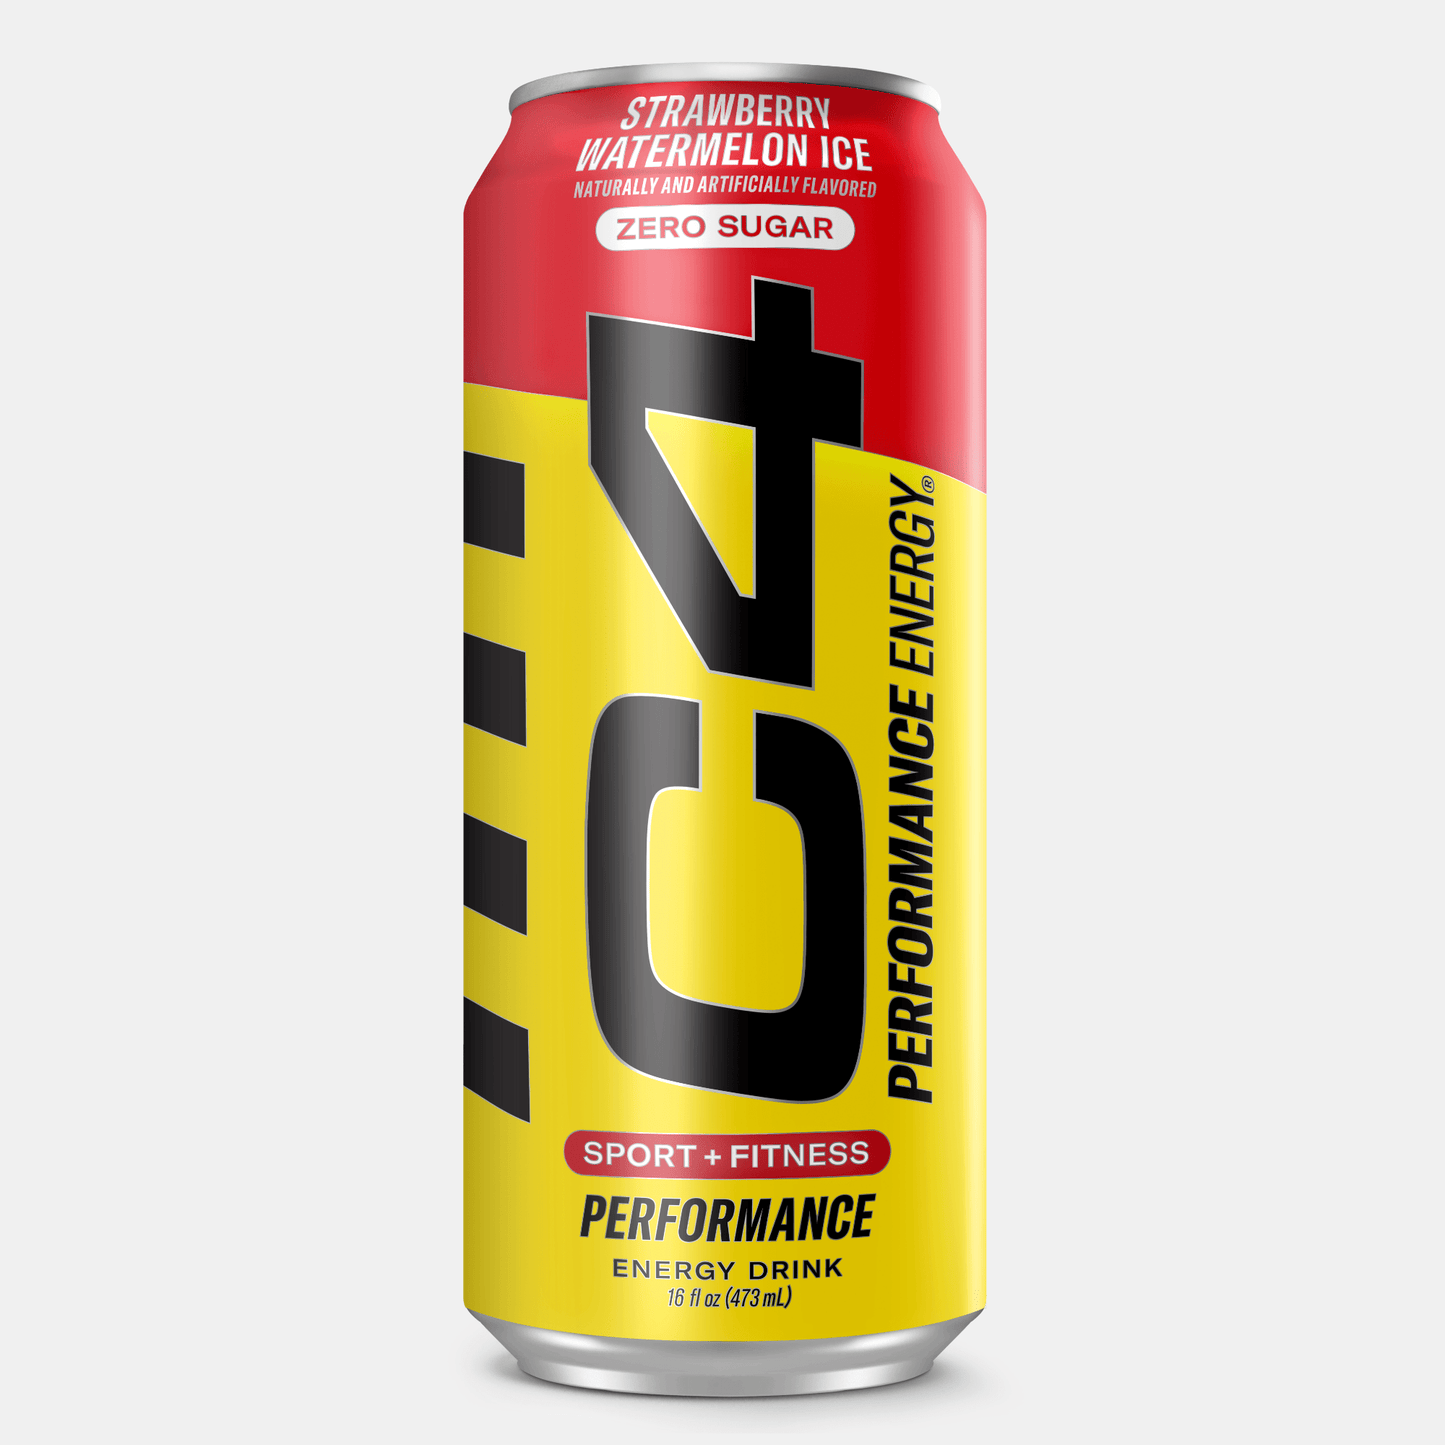 C4 Performance Energy® Carbonated